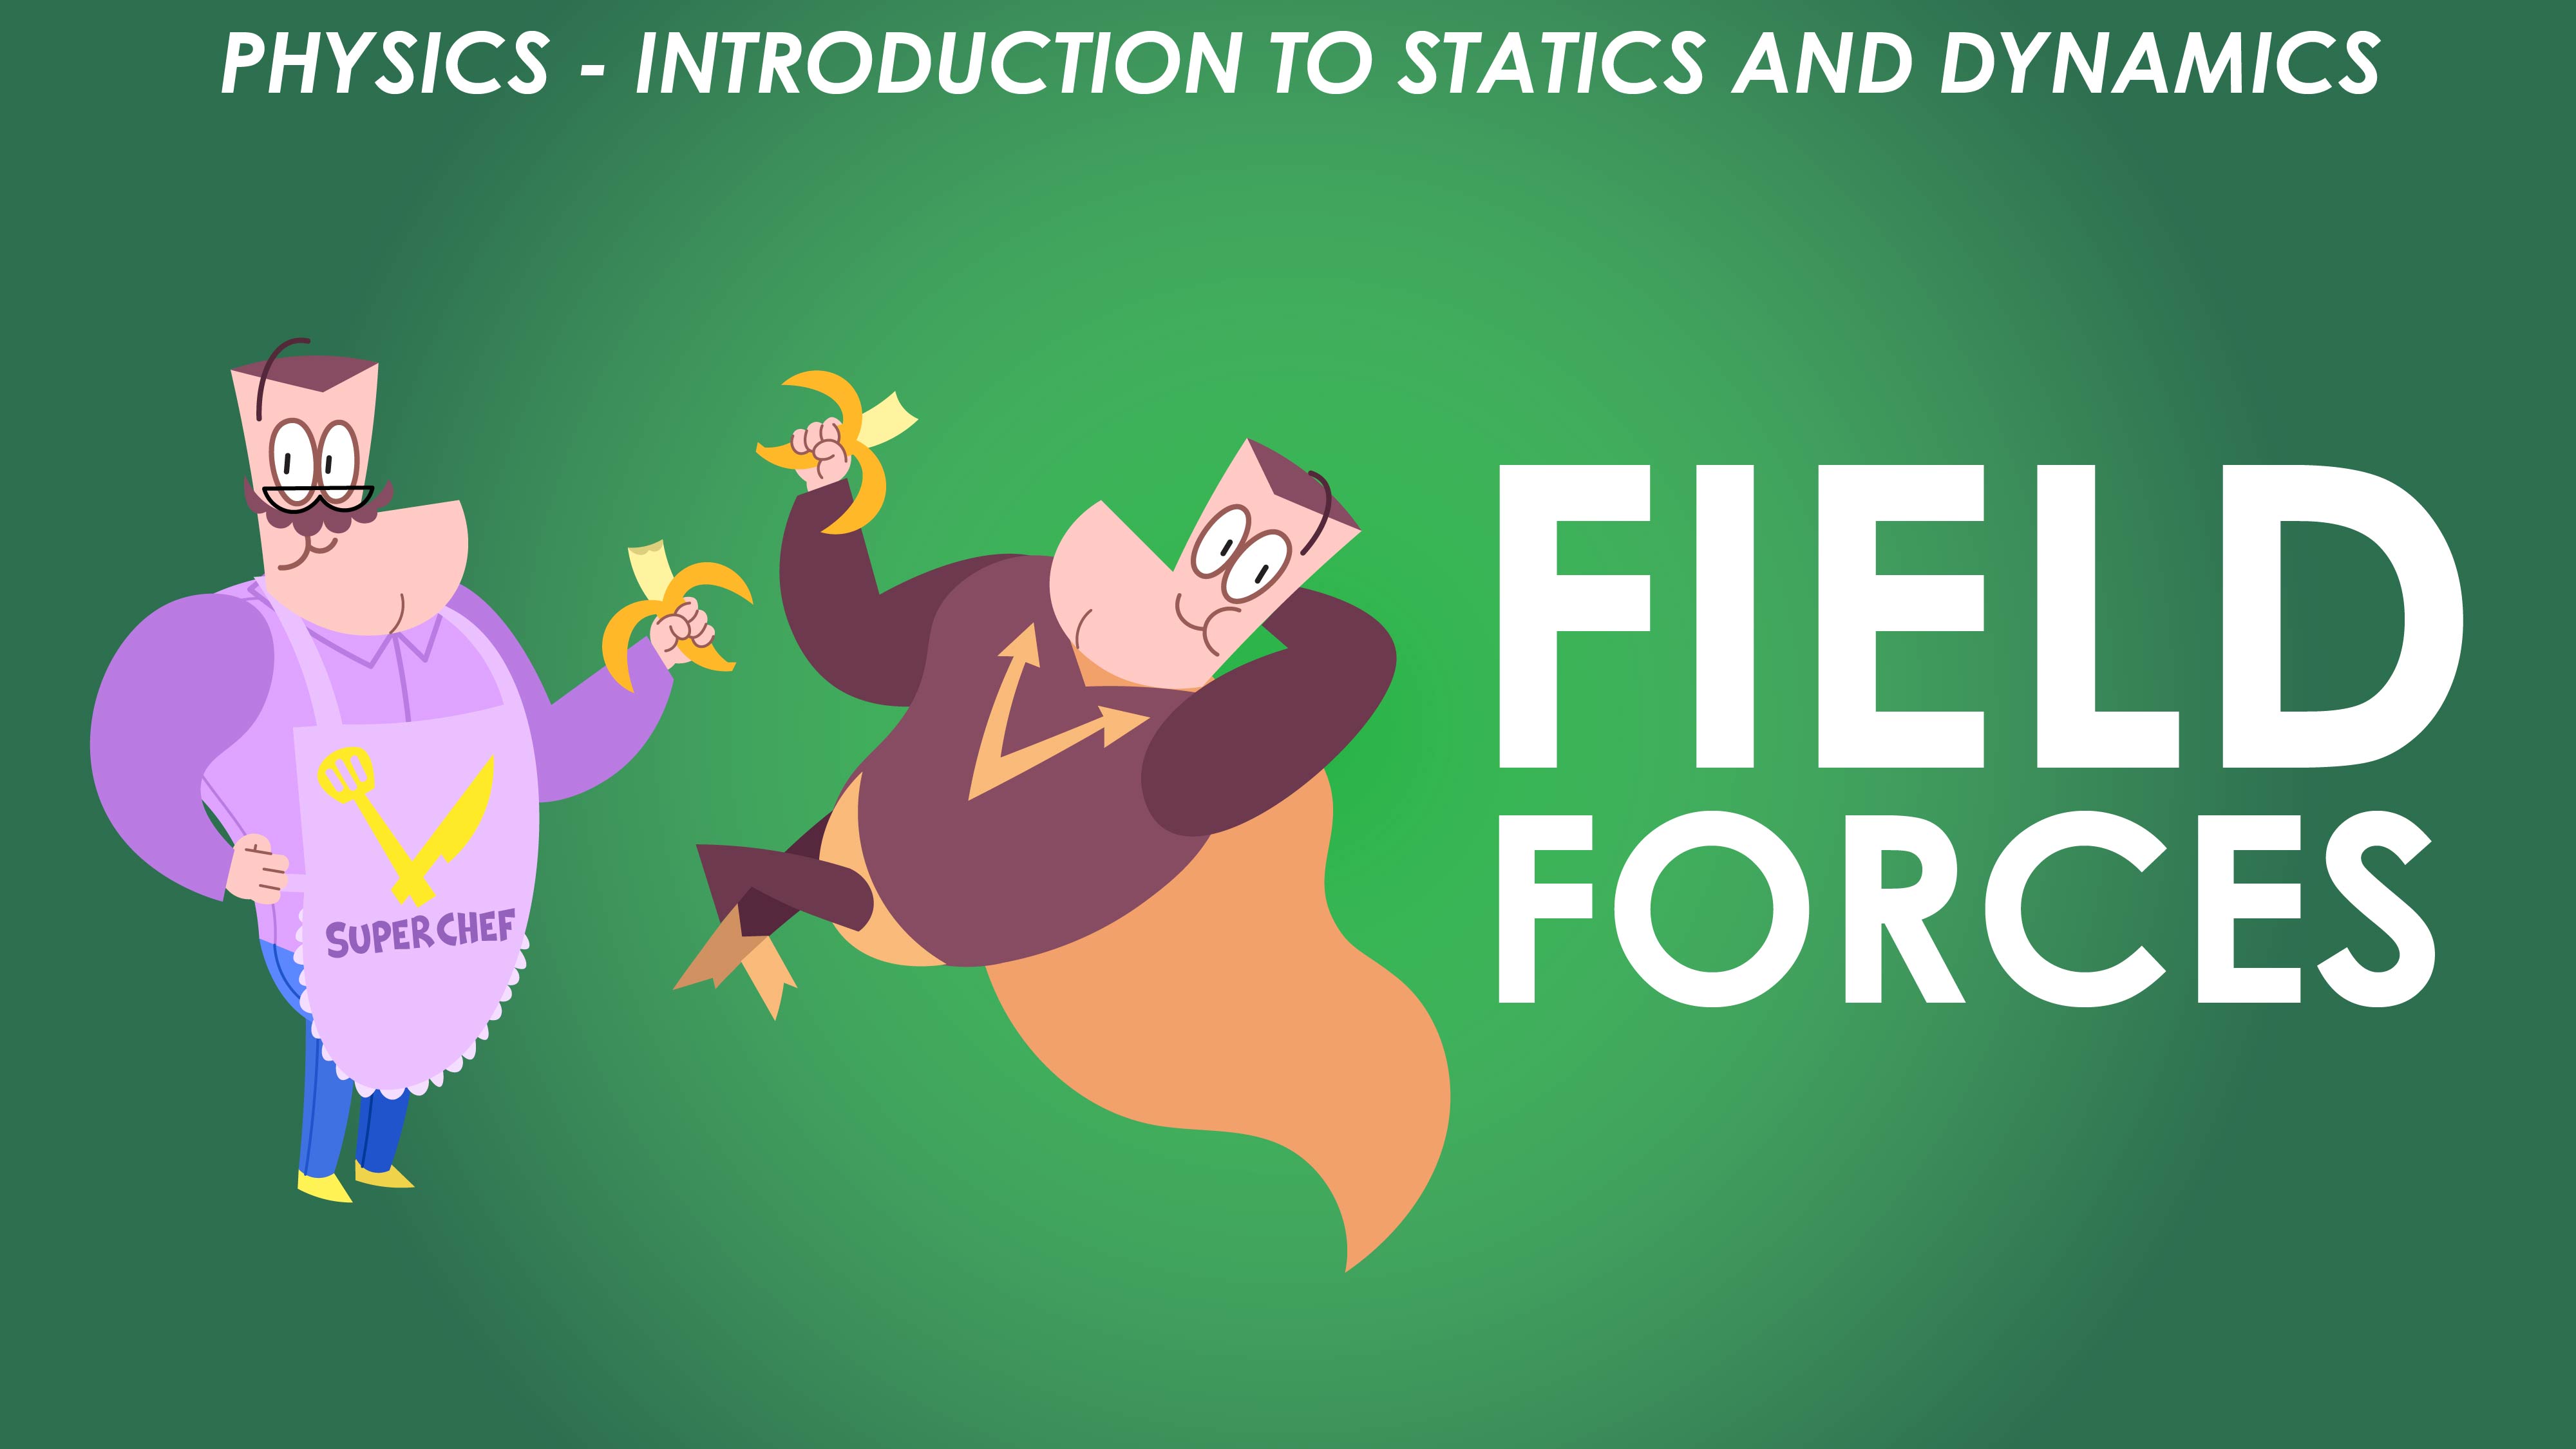 Field Forces - Forces and Newton’s Laws